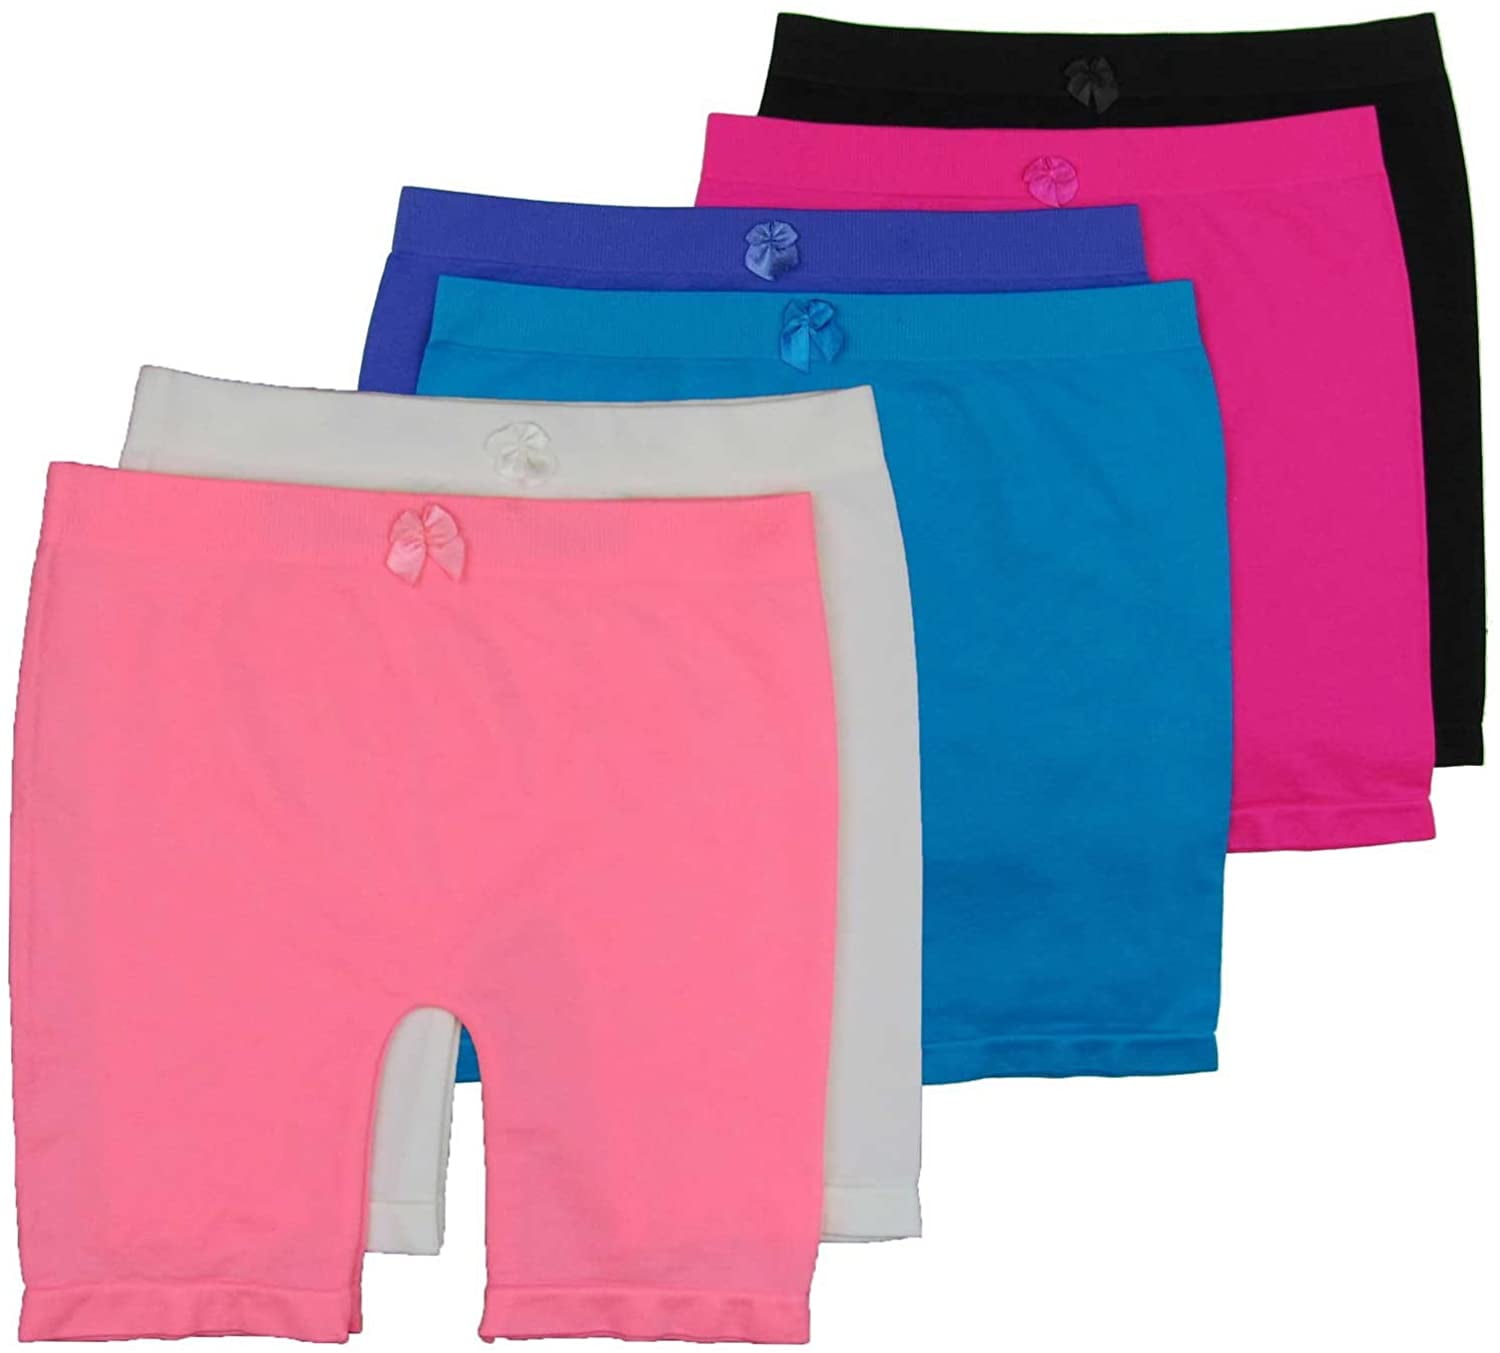 AUSDU 6 Pack Dance Shorts Girls Bike Short Breathable and Safety 6 Color